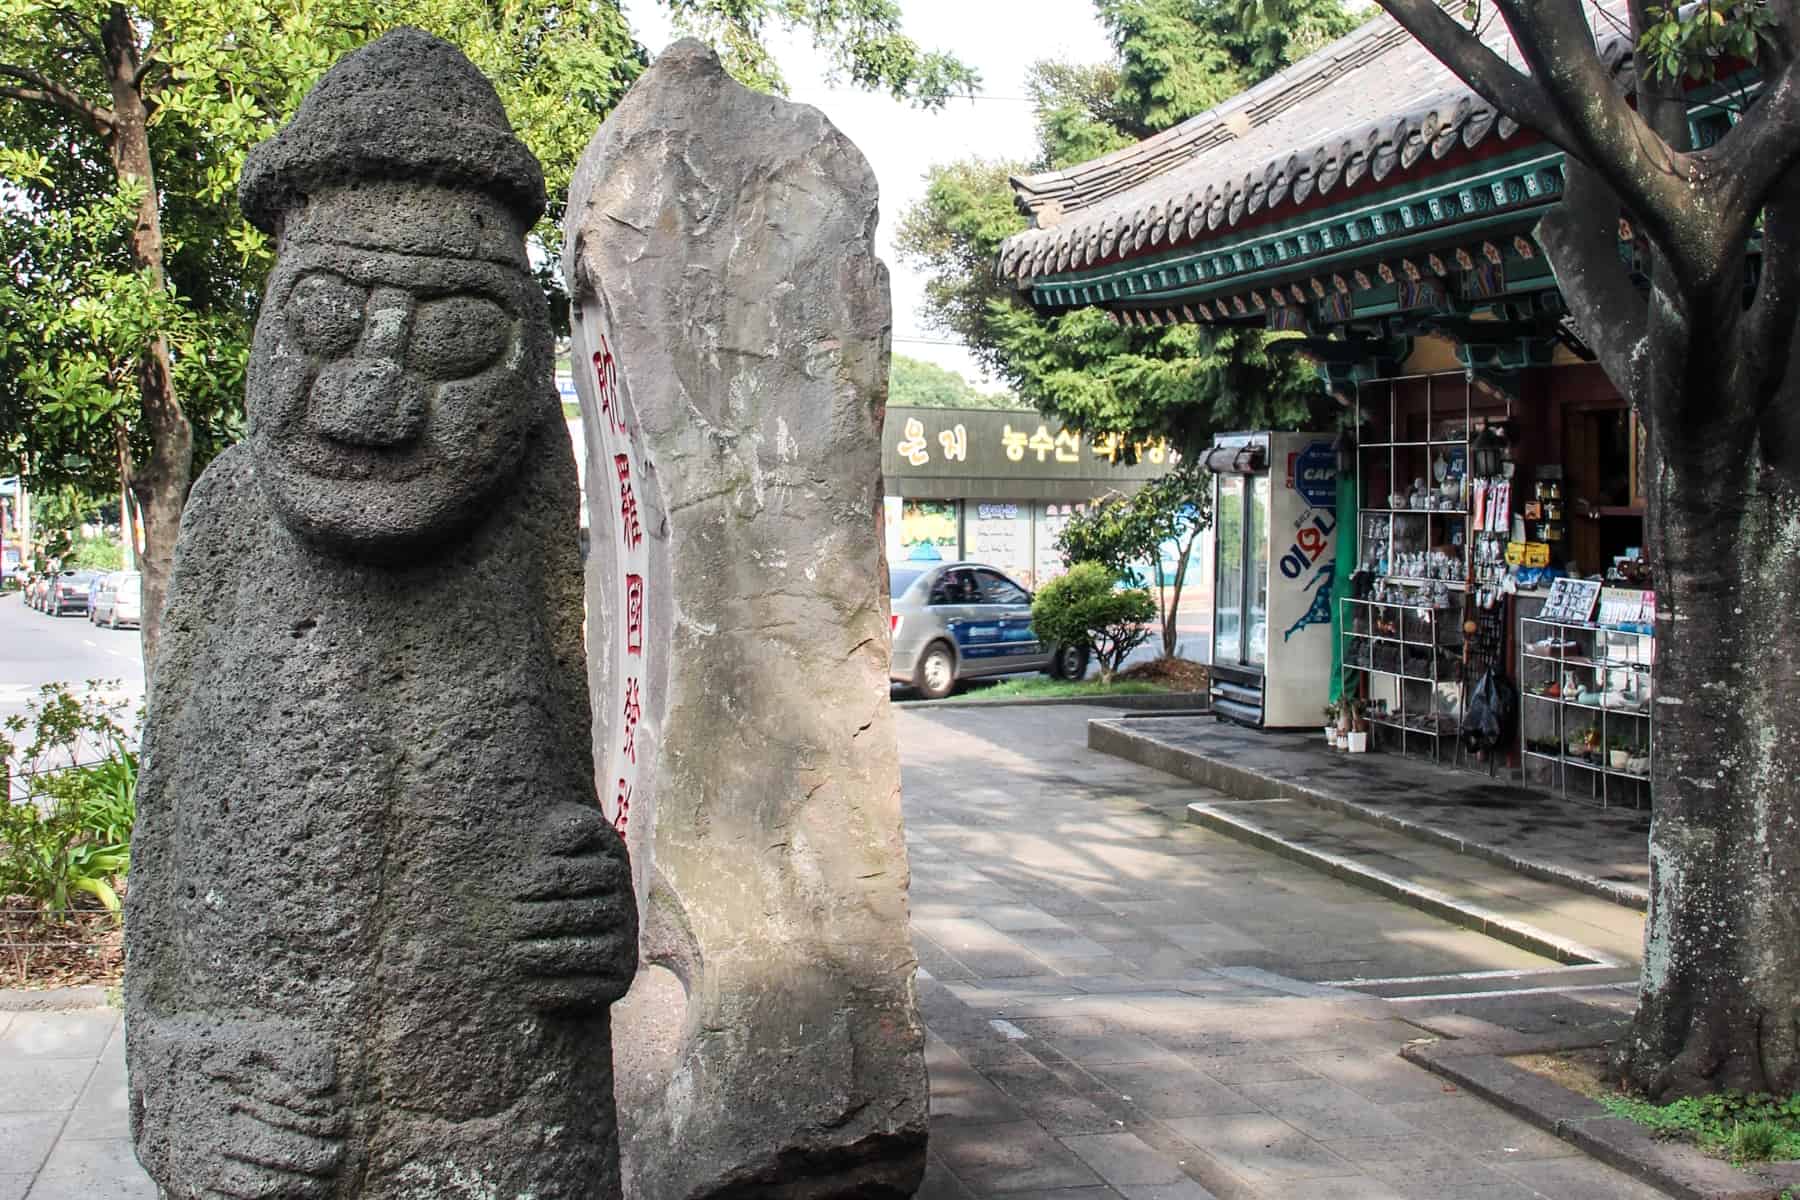 The male looking, bulging eyed Jeju Island Dol hareubang Stone Statues. This one stands outside a store, and is said to offer protection.